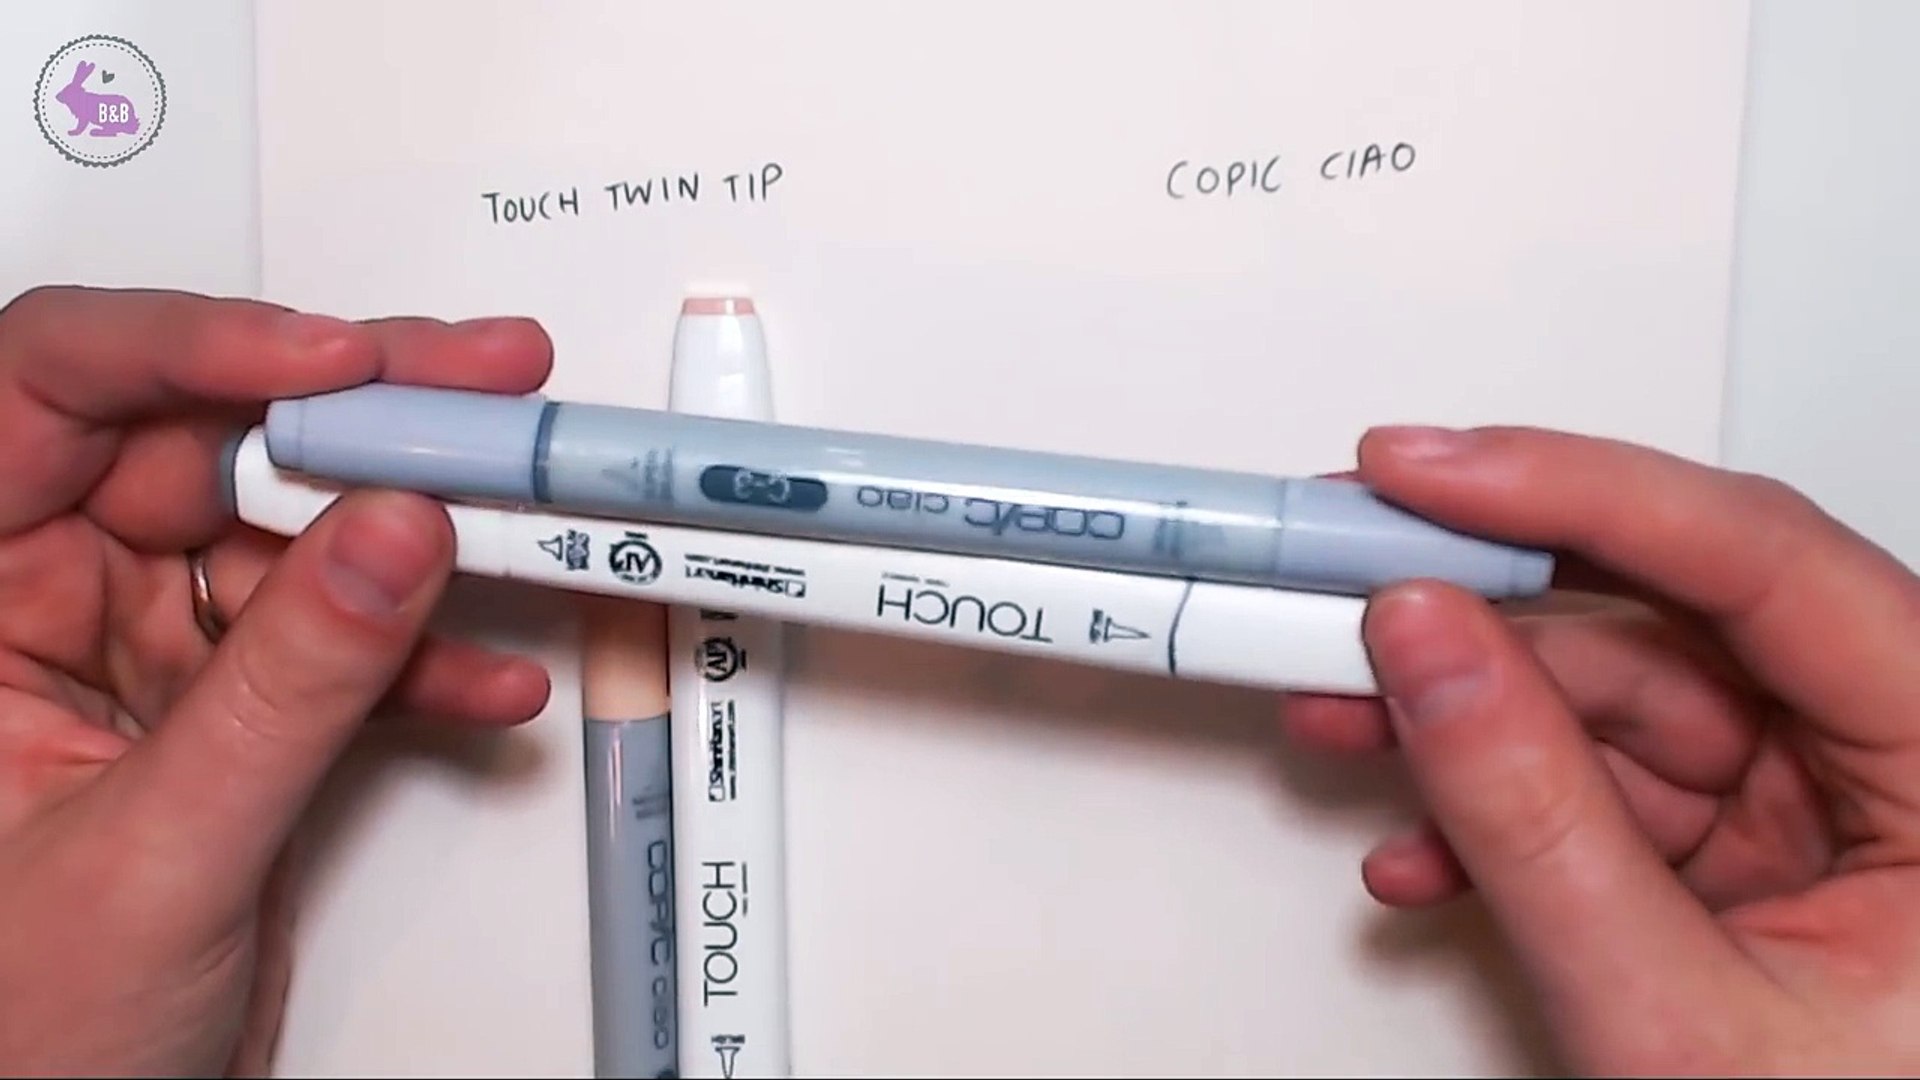 TOUCH VS. COPIC (Brush Tip) - Which One is Better? - video Dailymotion